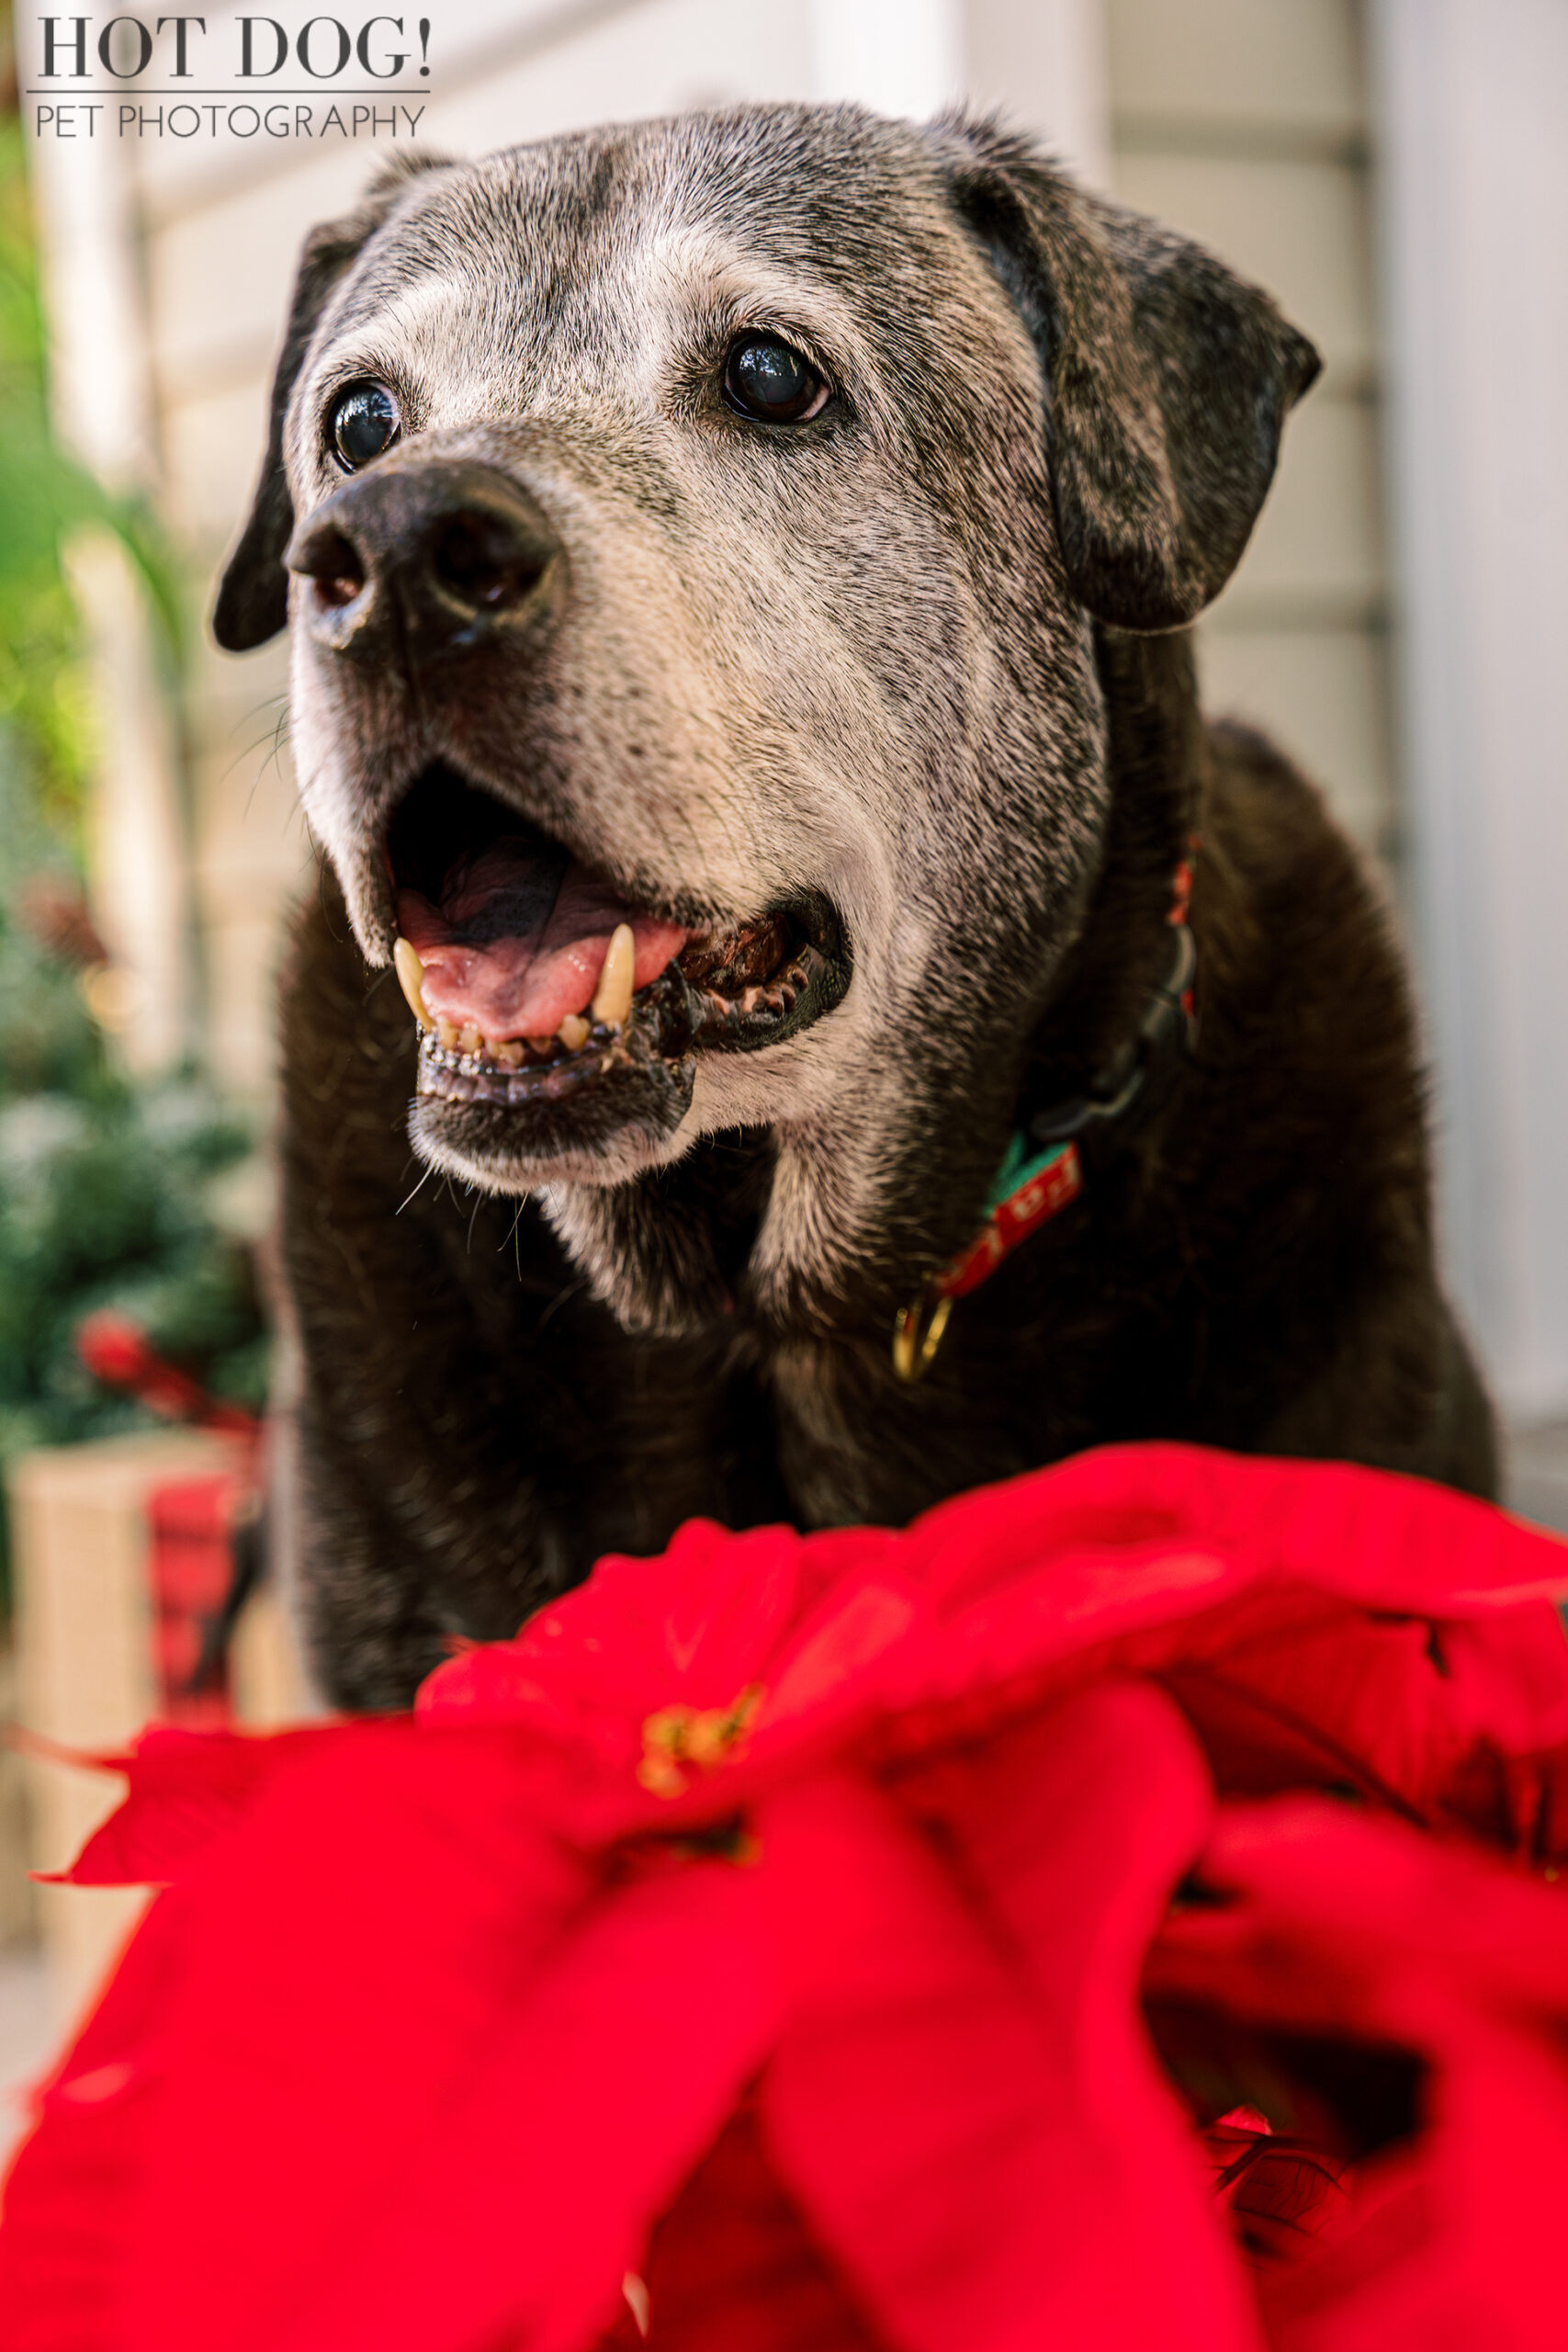 Senior dog Lambeau is a very good boy posing by the poinsettia and Christmas decorations. (Photo by Hot Dog! Pet Photography)